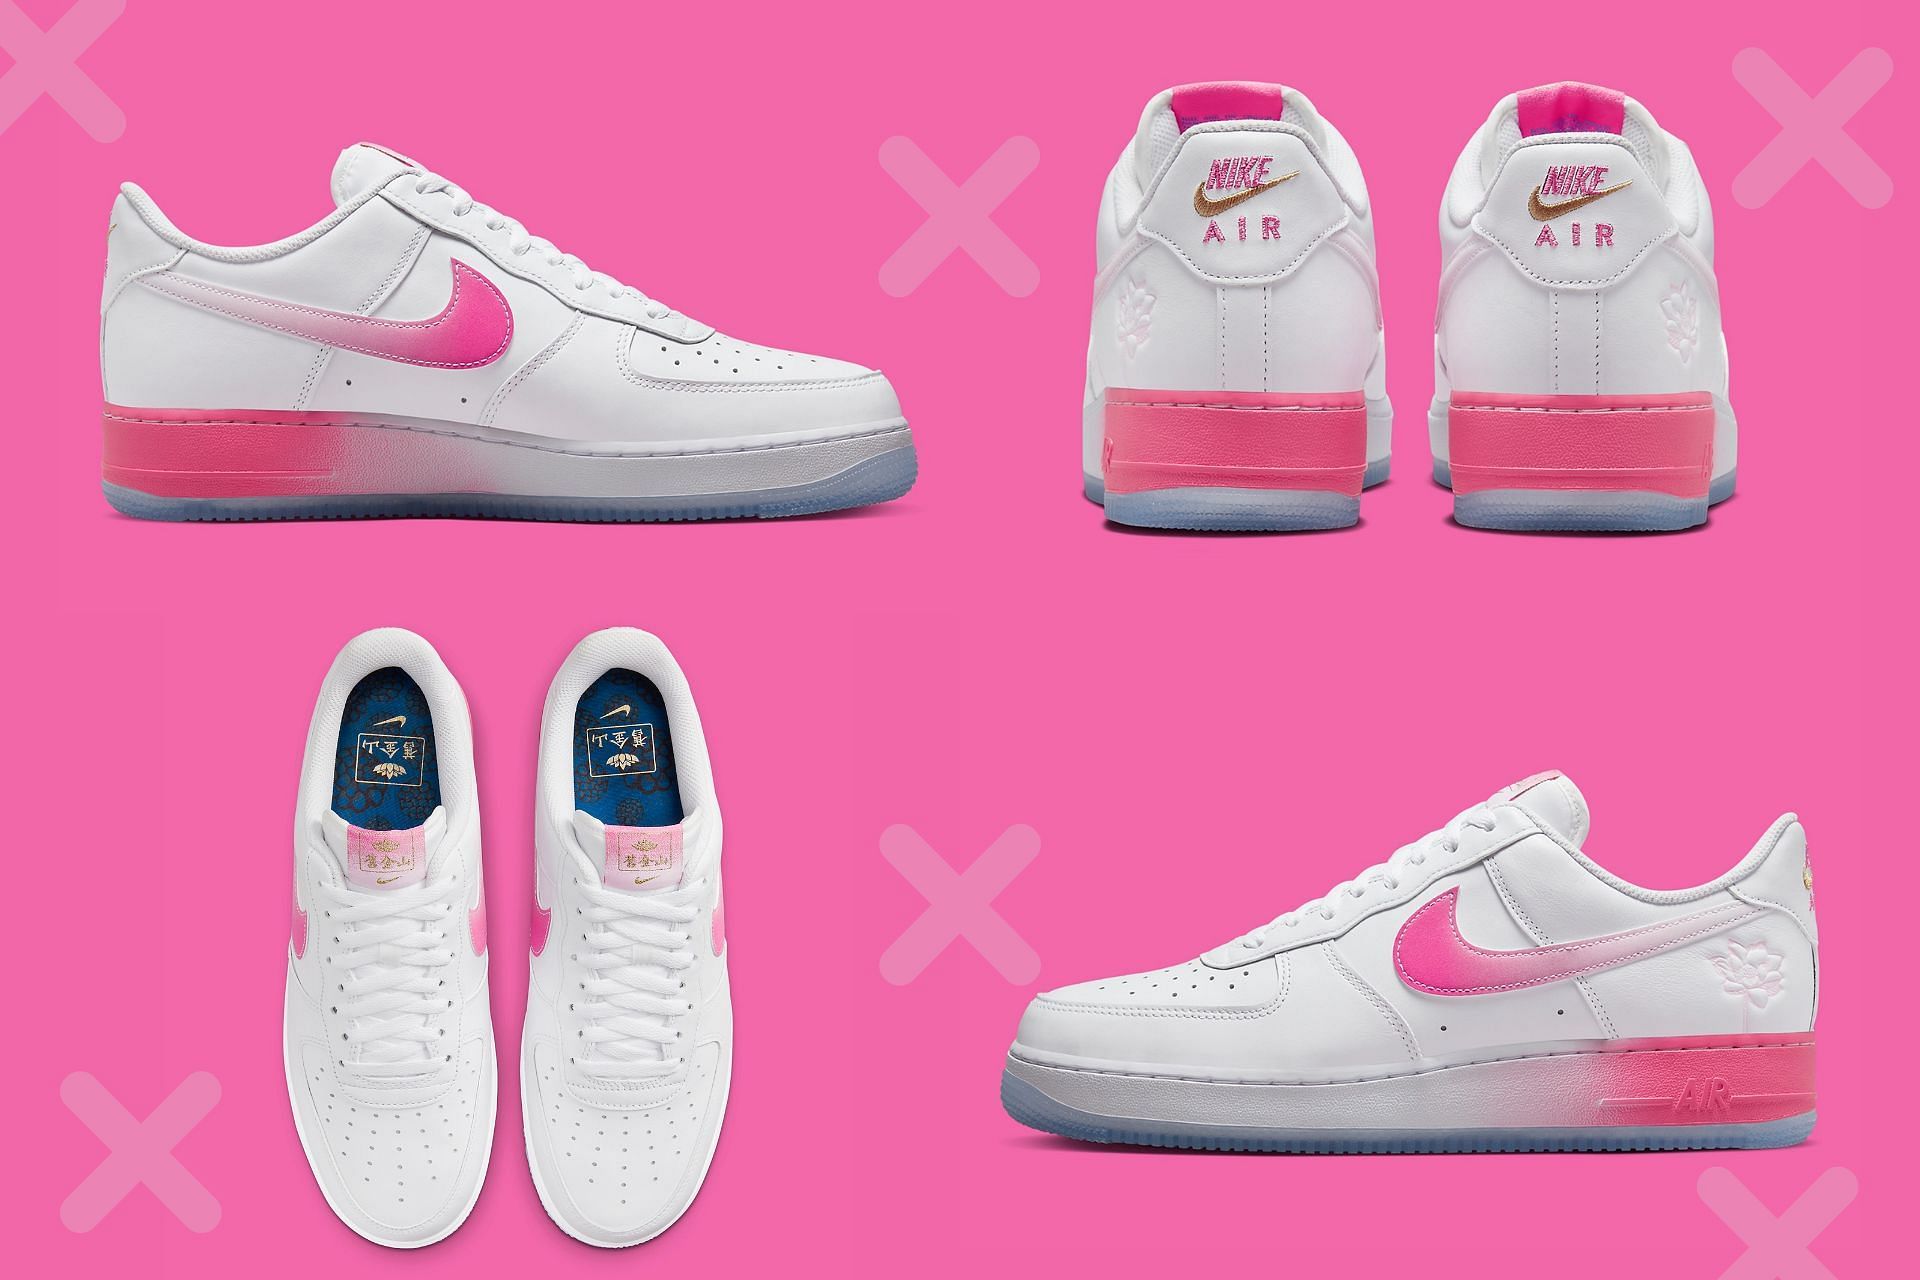 Where to buy Nike Air Force 1 San Francisco Everything know so far